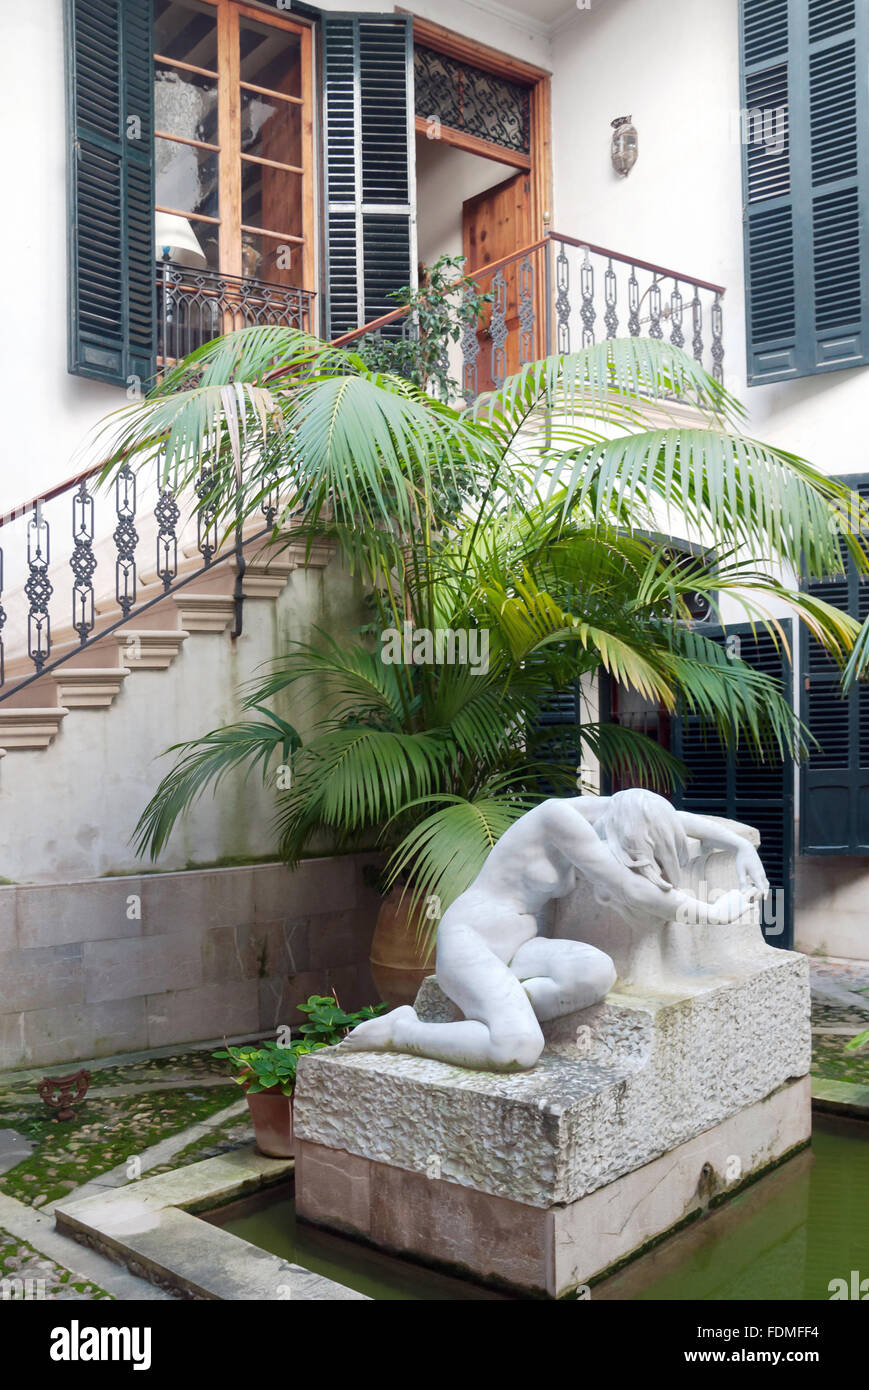 Entrance to Museum of Joaquim Torrents Llado with classical marble sculpture and palm trees in Palma de Malllorca, Spain Stock Photo